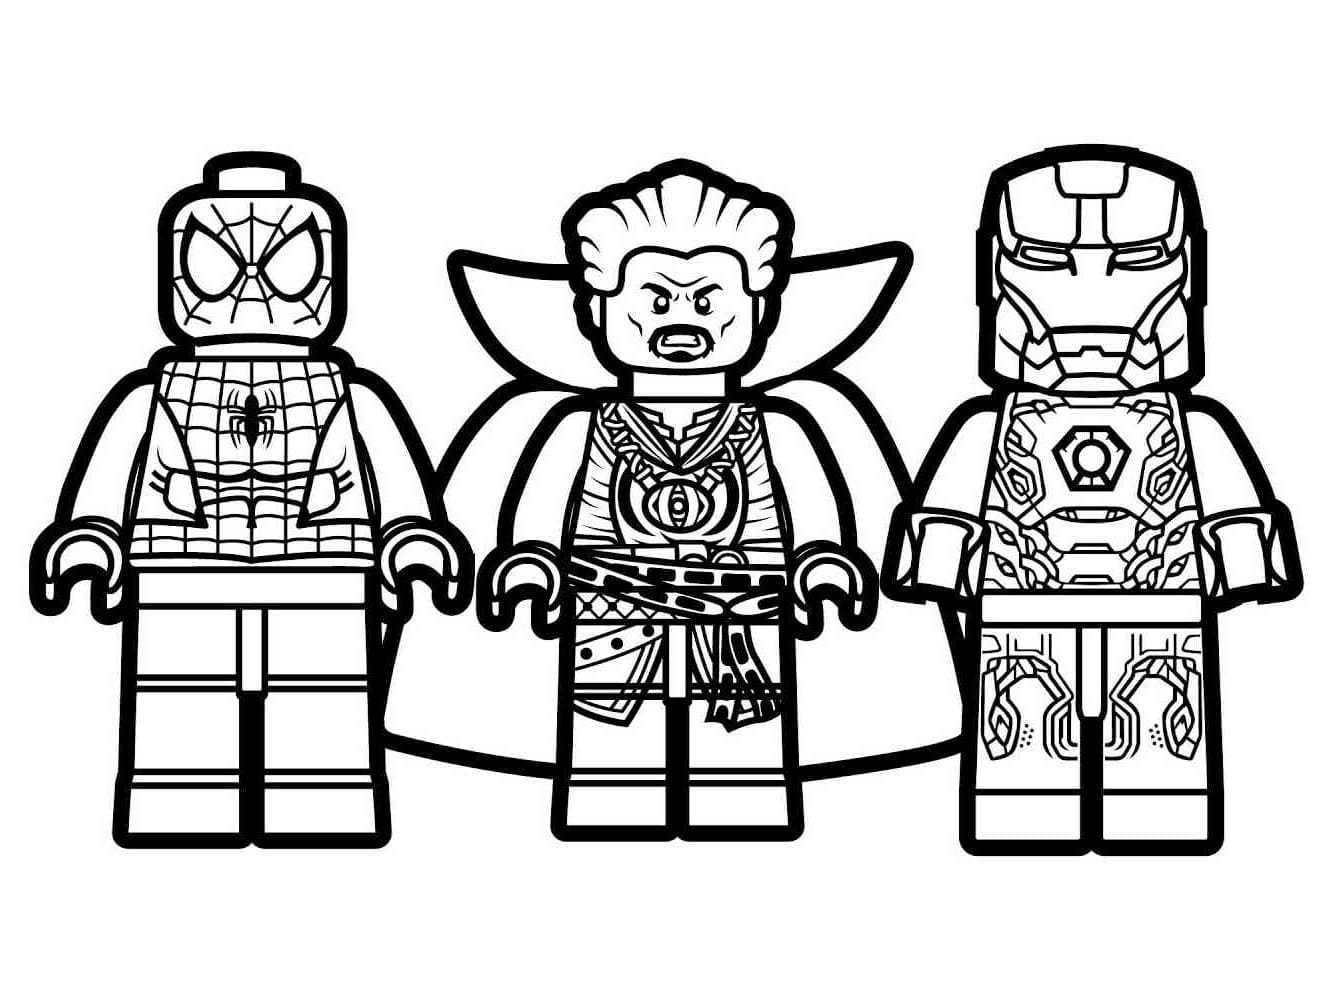 Lego Avengers coloring page